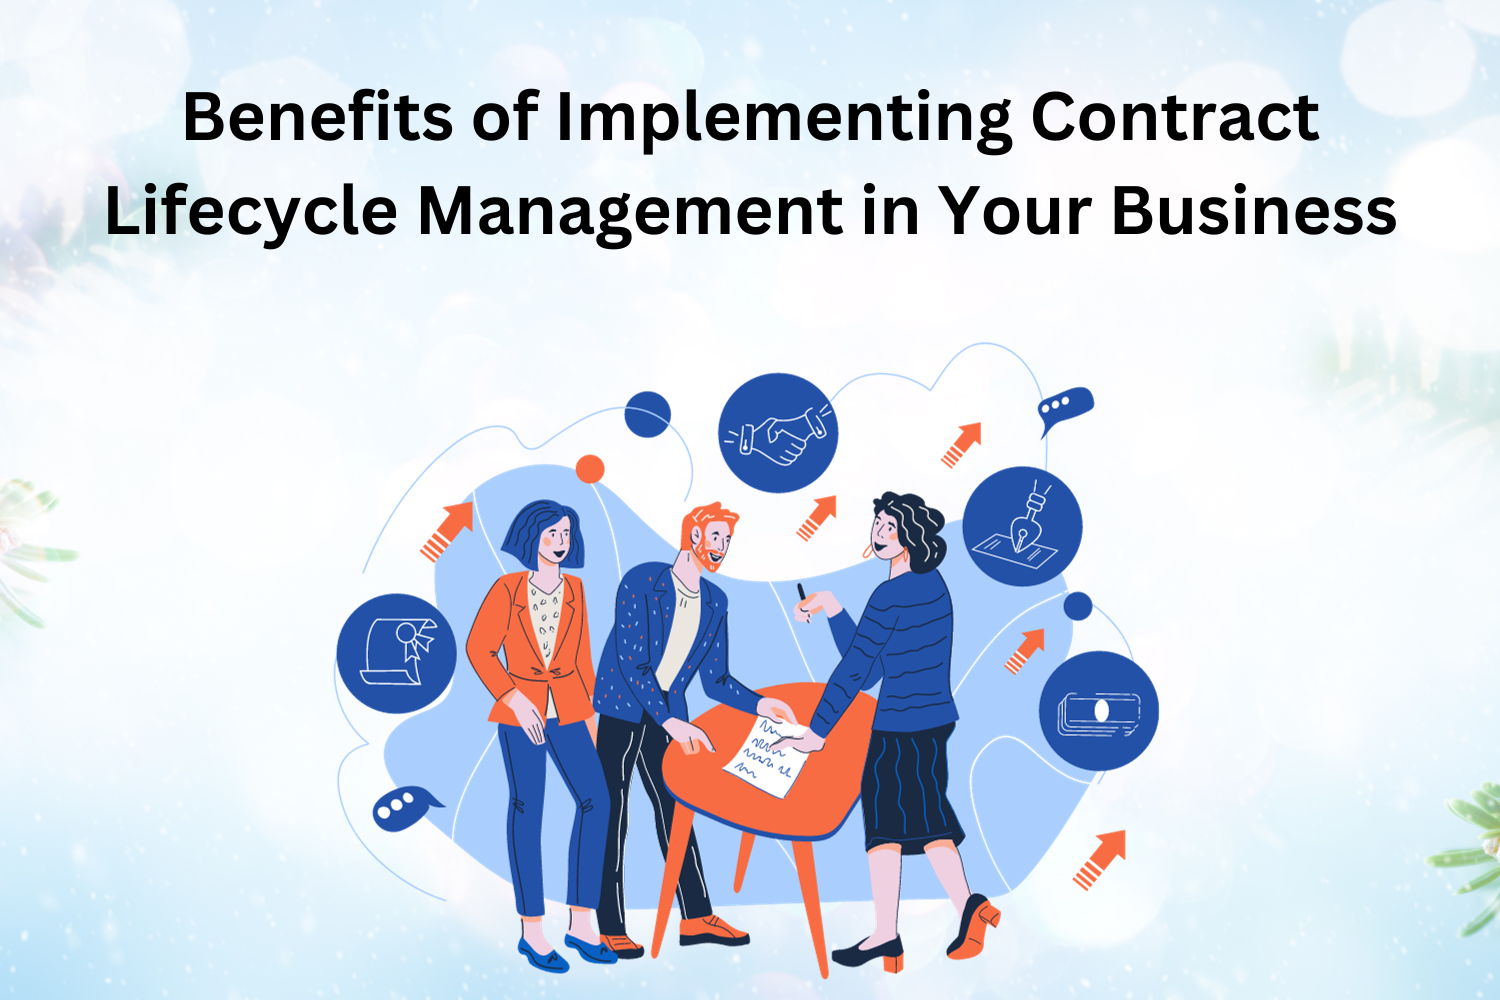 Benefits of Implementing Contract Lifecycle Management in Your Business